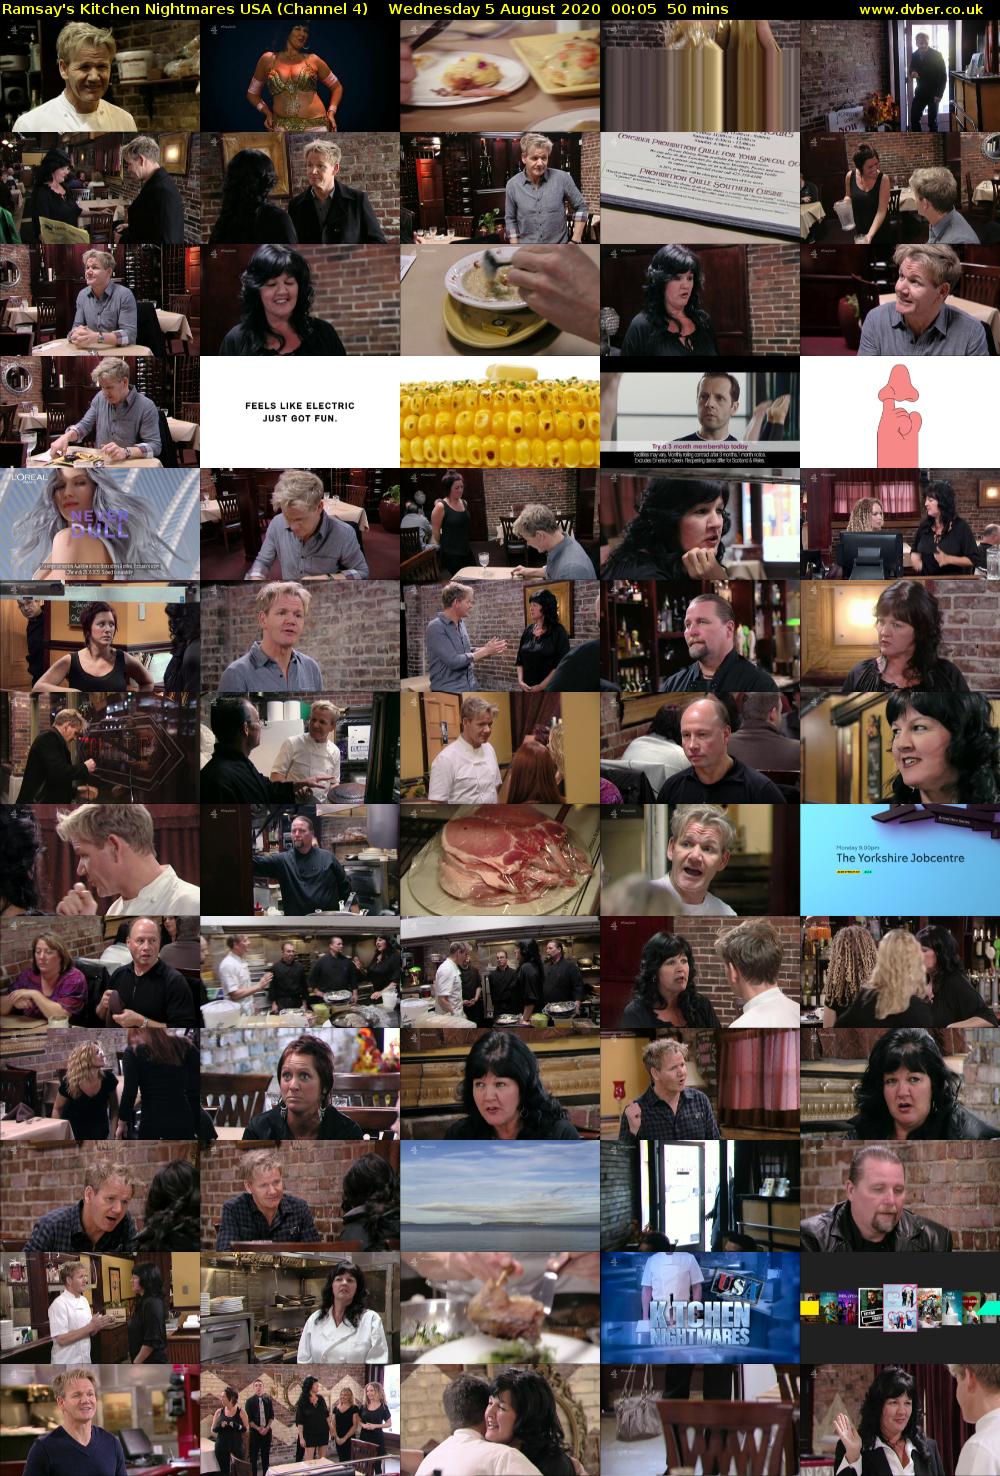 Ramsay's Kitchen Nightmares USA (Channel 4) Wednesday 5 August 2020 00:05 - 00:55